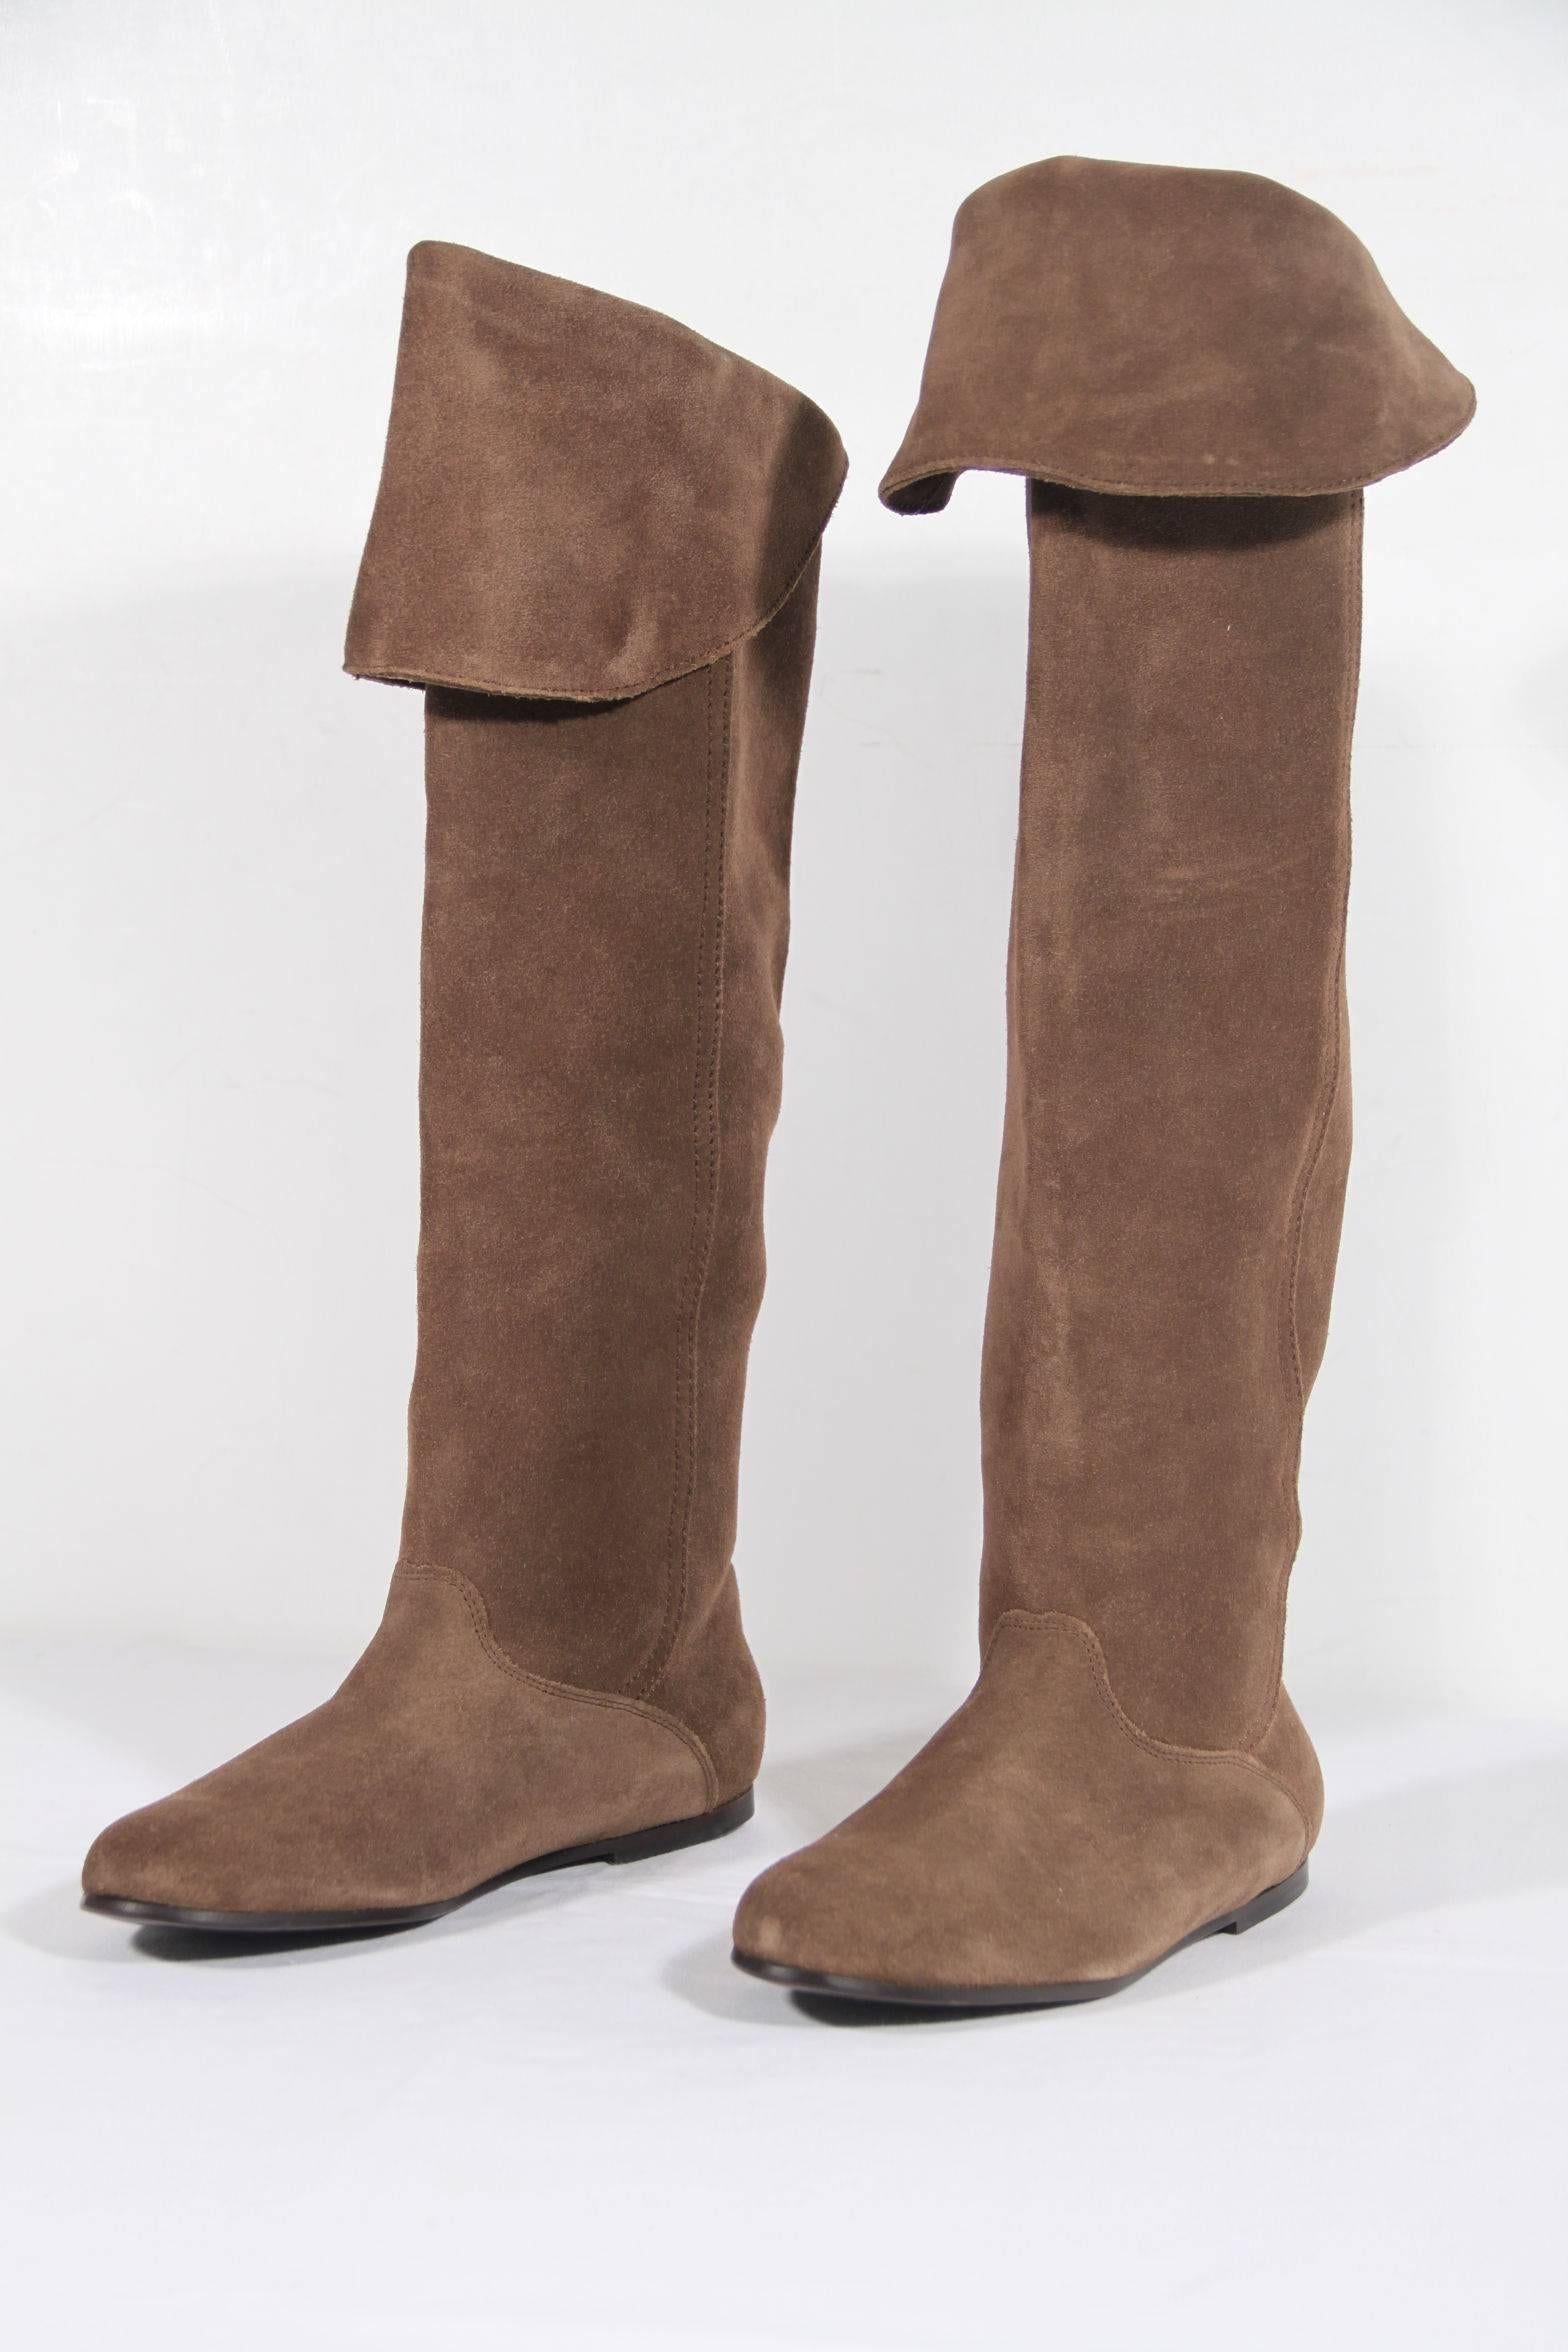 WEEKEND by MAX MARA Italian Tan Suede FLAT Knee BOOTS Shoes SIZE 37 In Excellent Condition In Rome, Rome